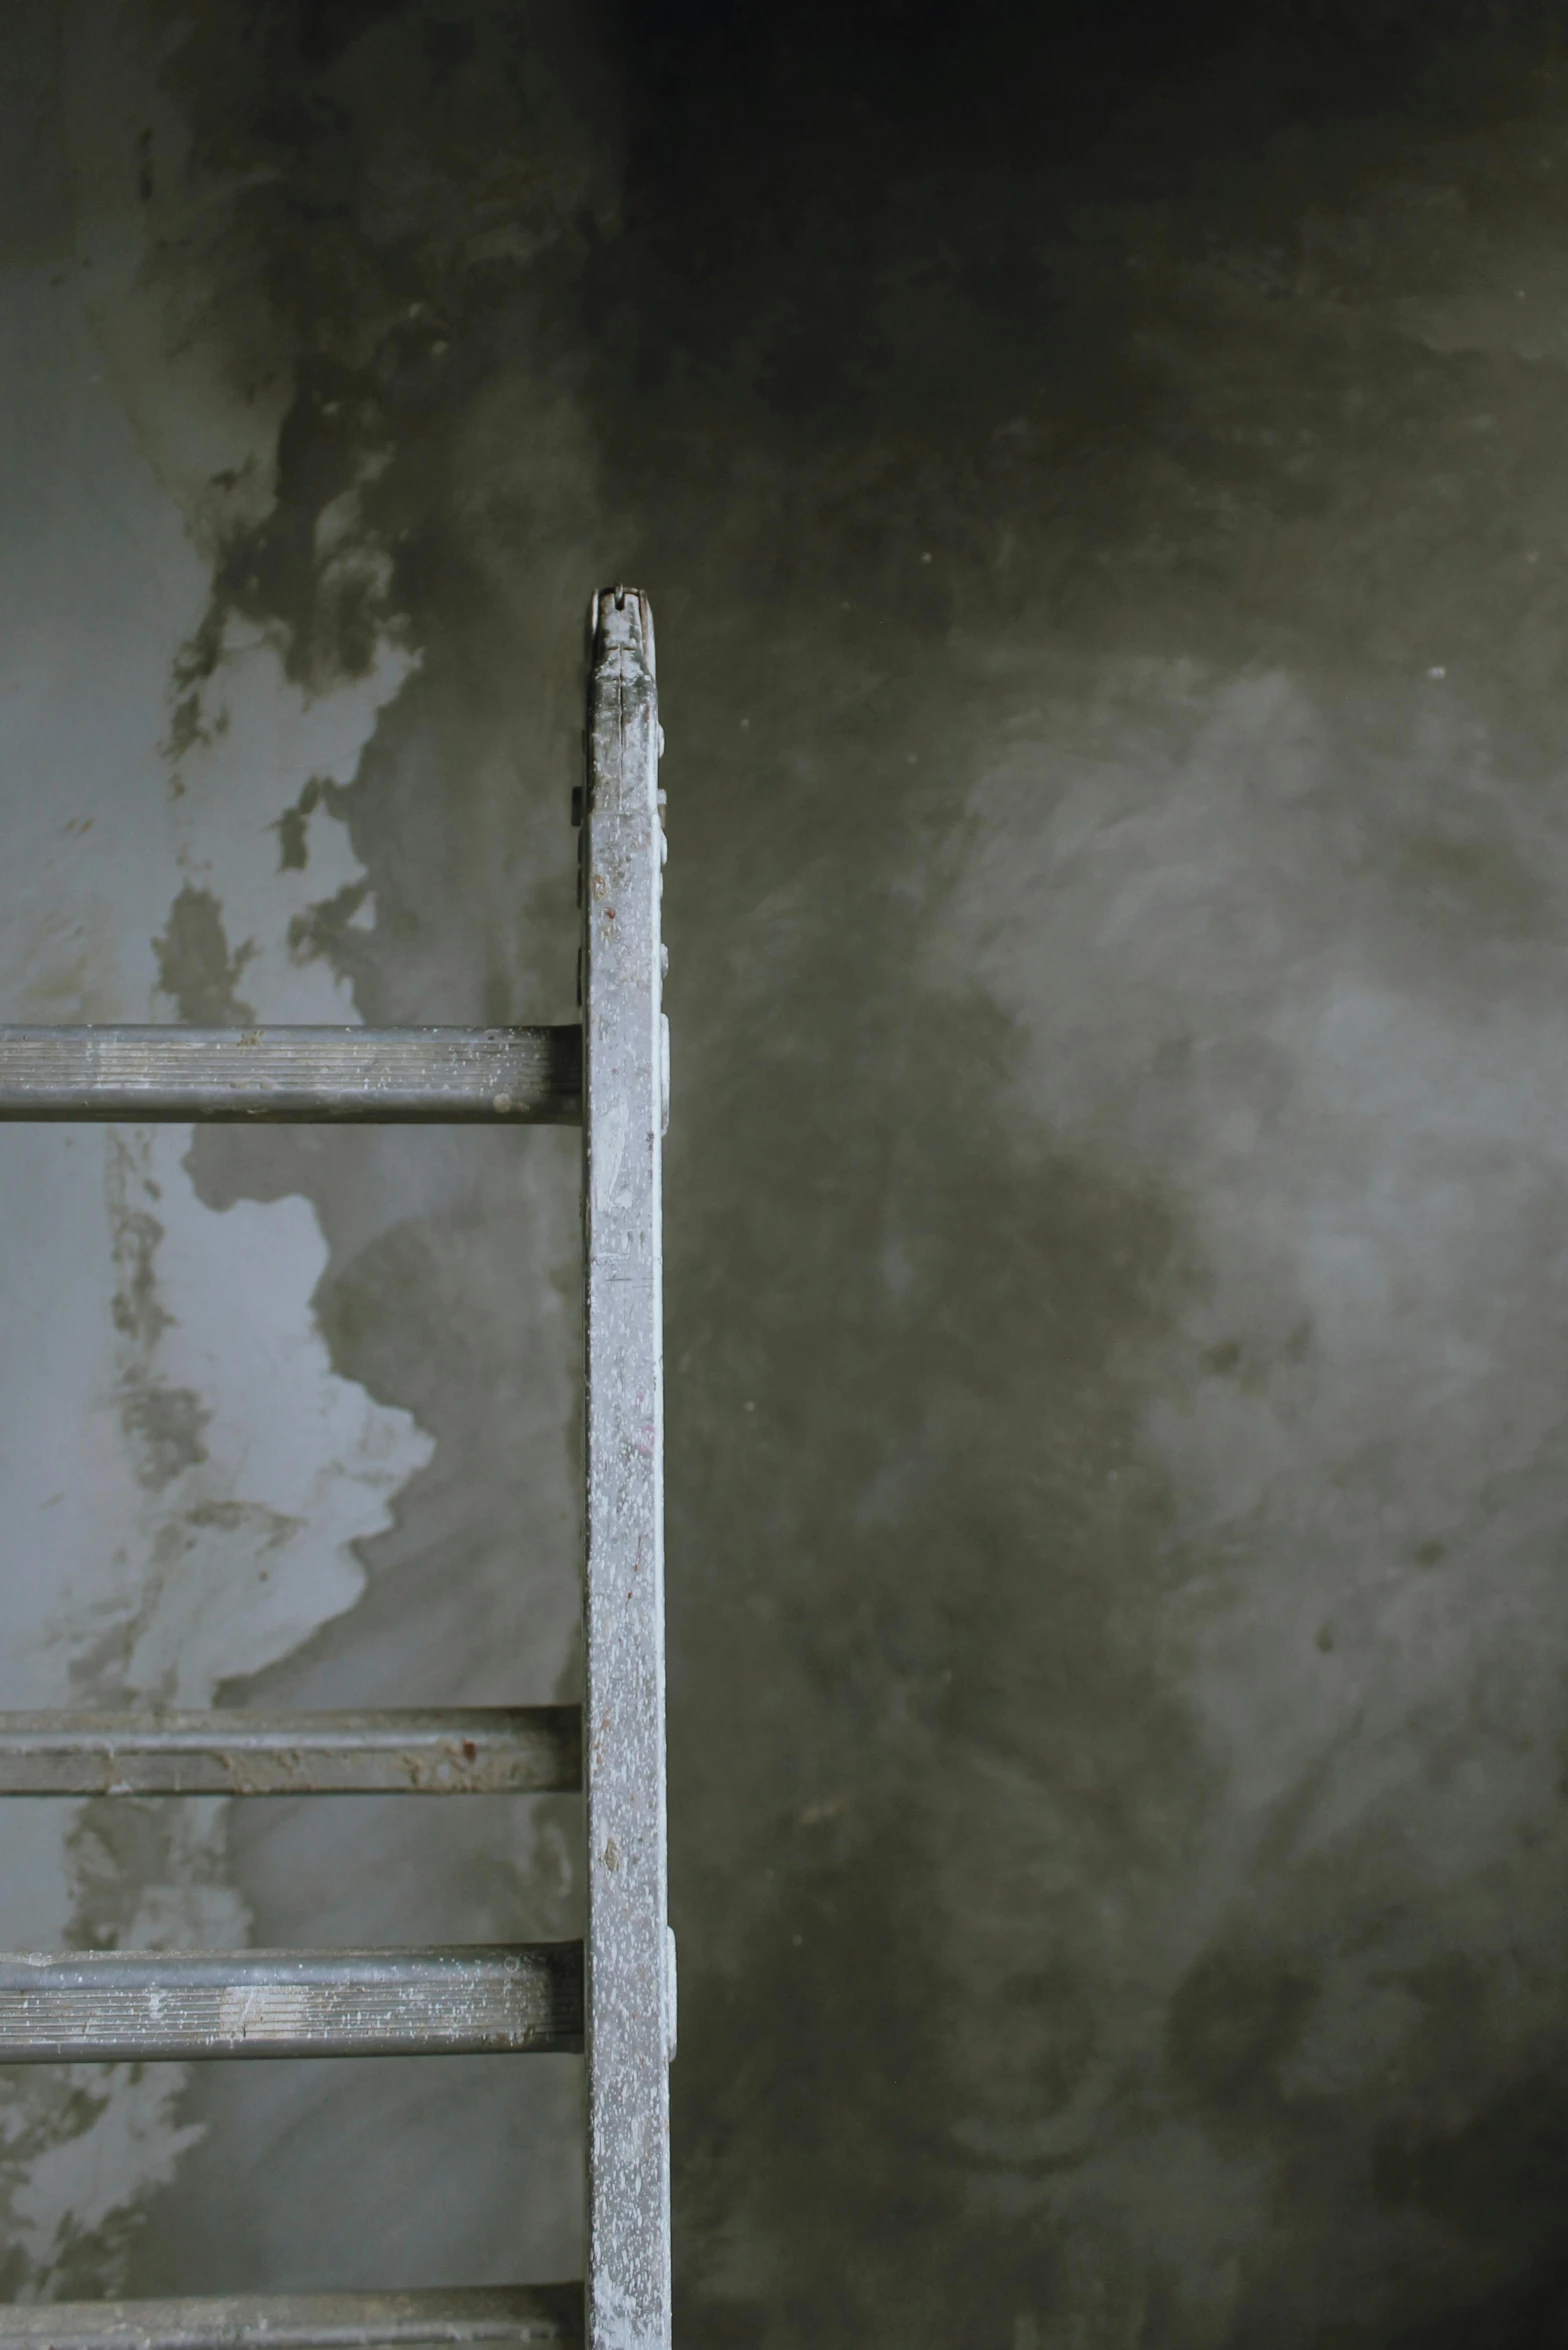 a ladder leaning against a wall in a room, by Elsa Bleda, conceptual art, scratched metal, video still, concrete ), contain